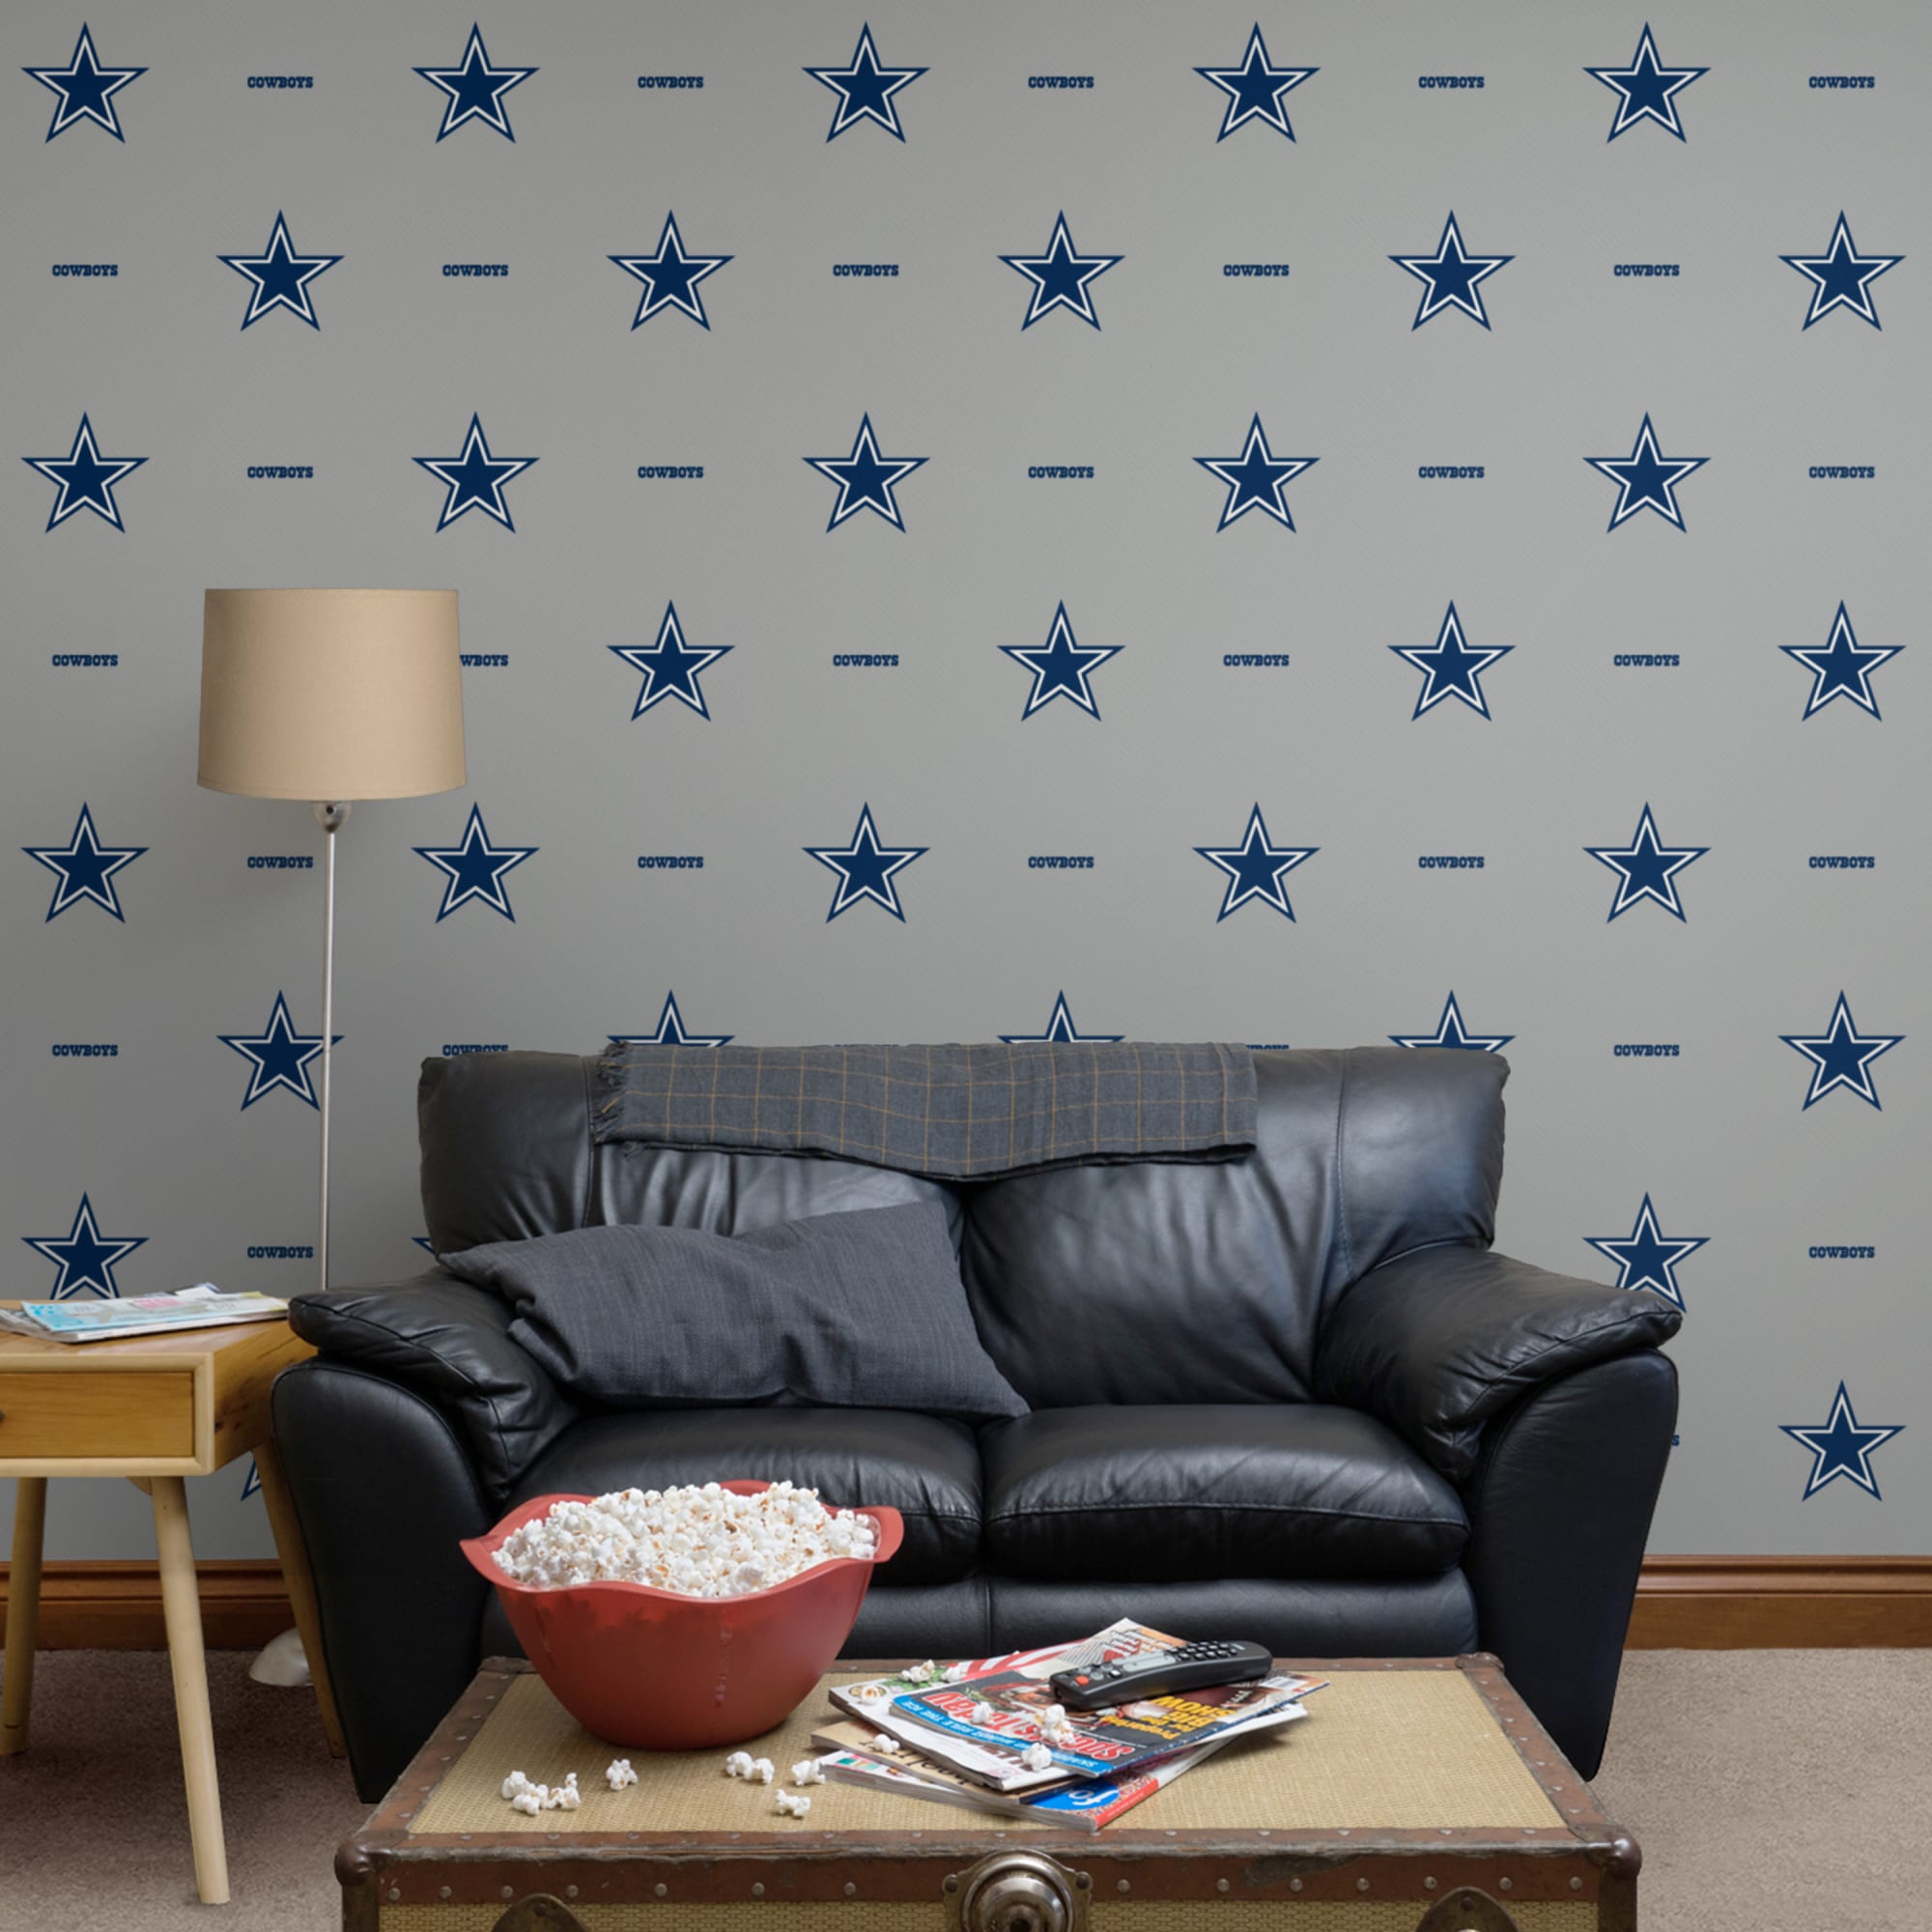 Dallas Cowboys: Line Pattern - Officially Licensed NFL Removable Wallpaper 12" x 12" Sample by Fathead